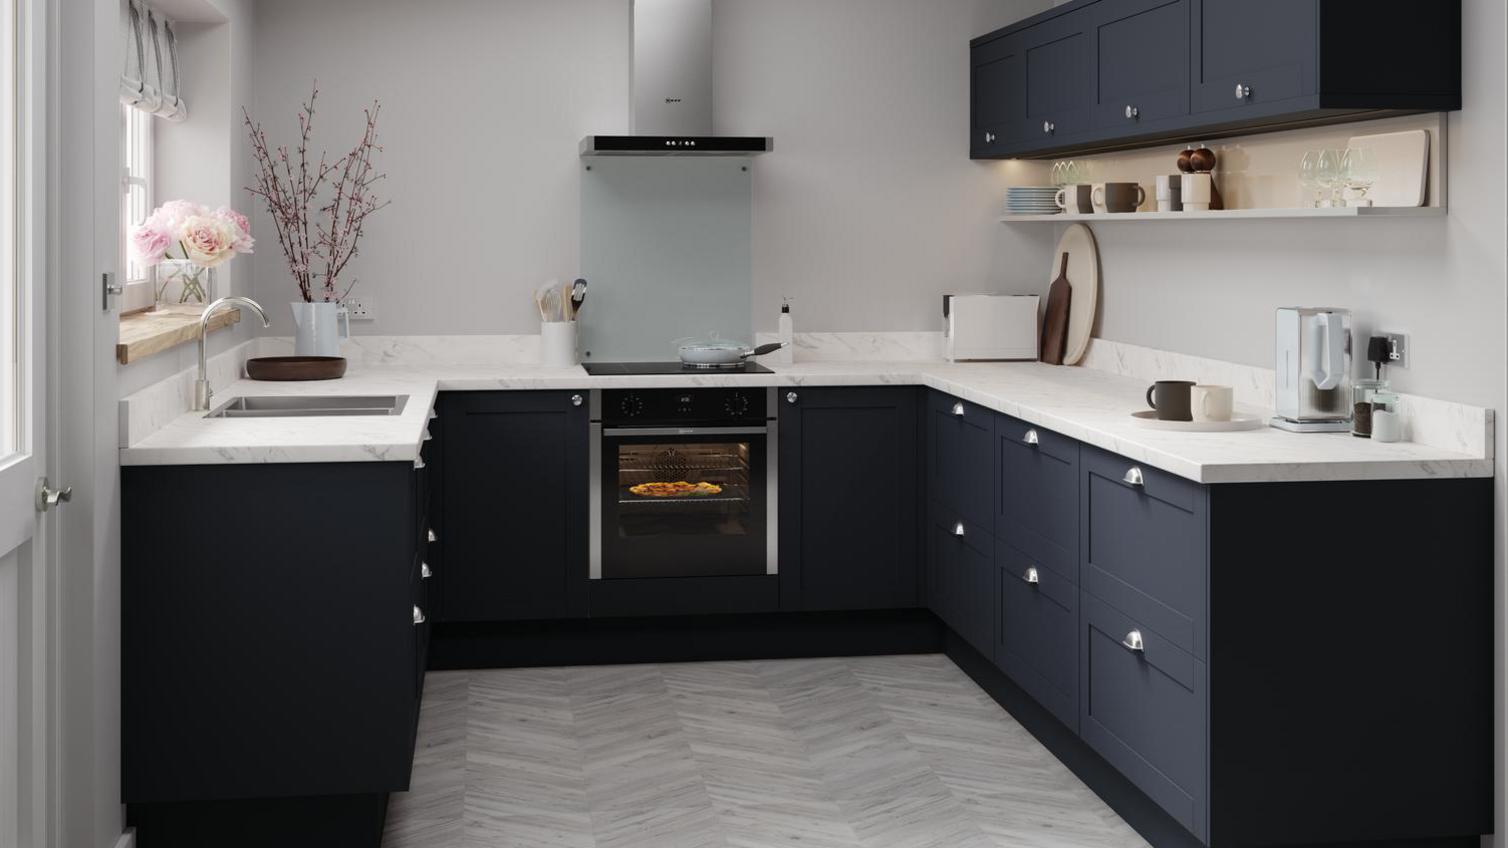 A Witney shaker kitchen from Howdens in a classic navy colour.